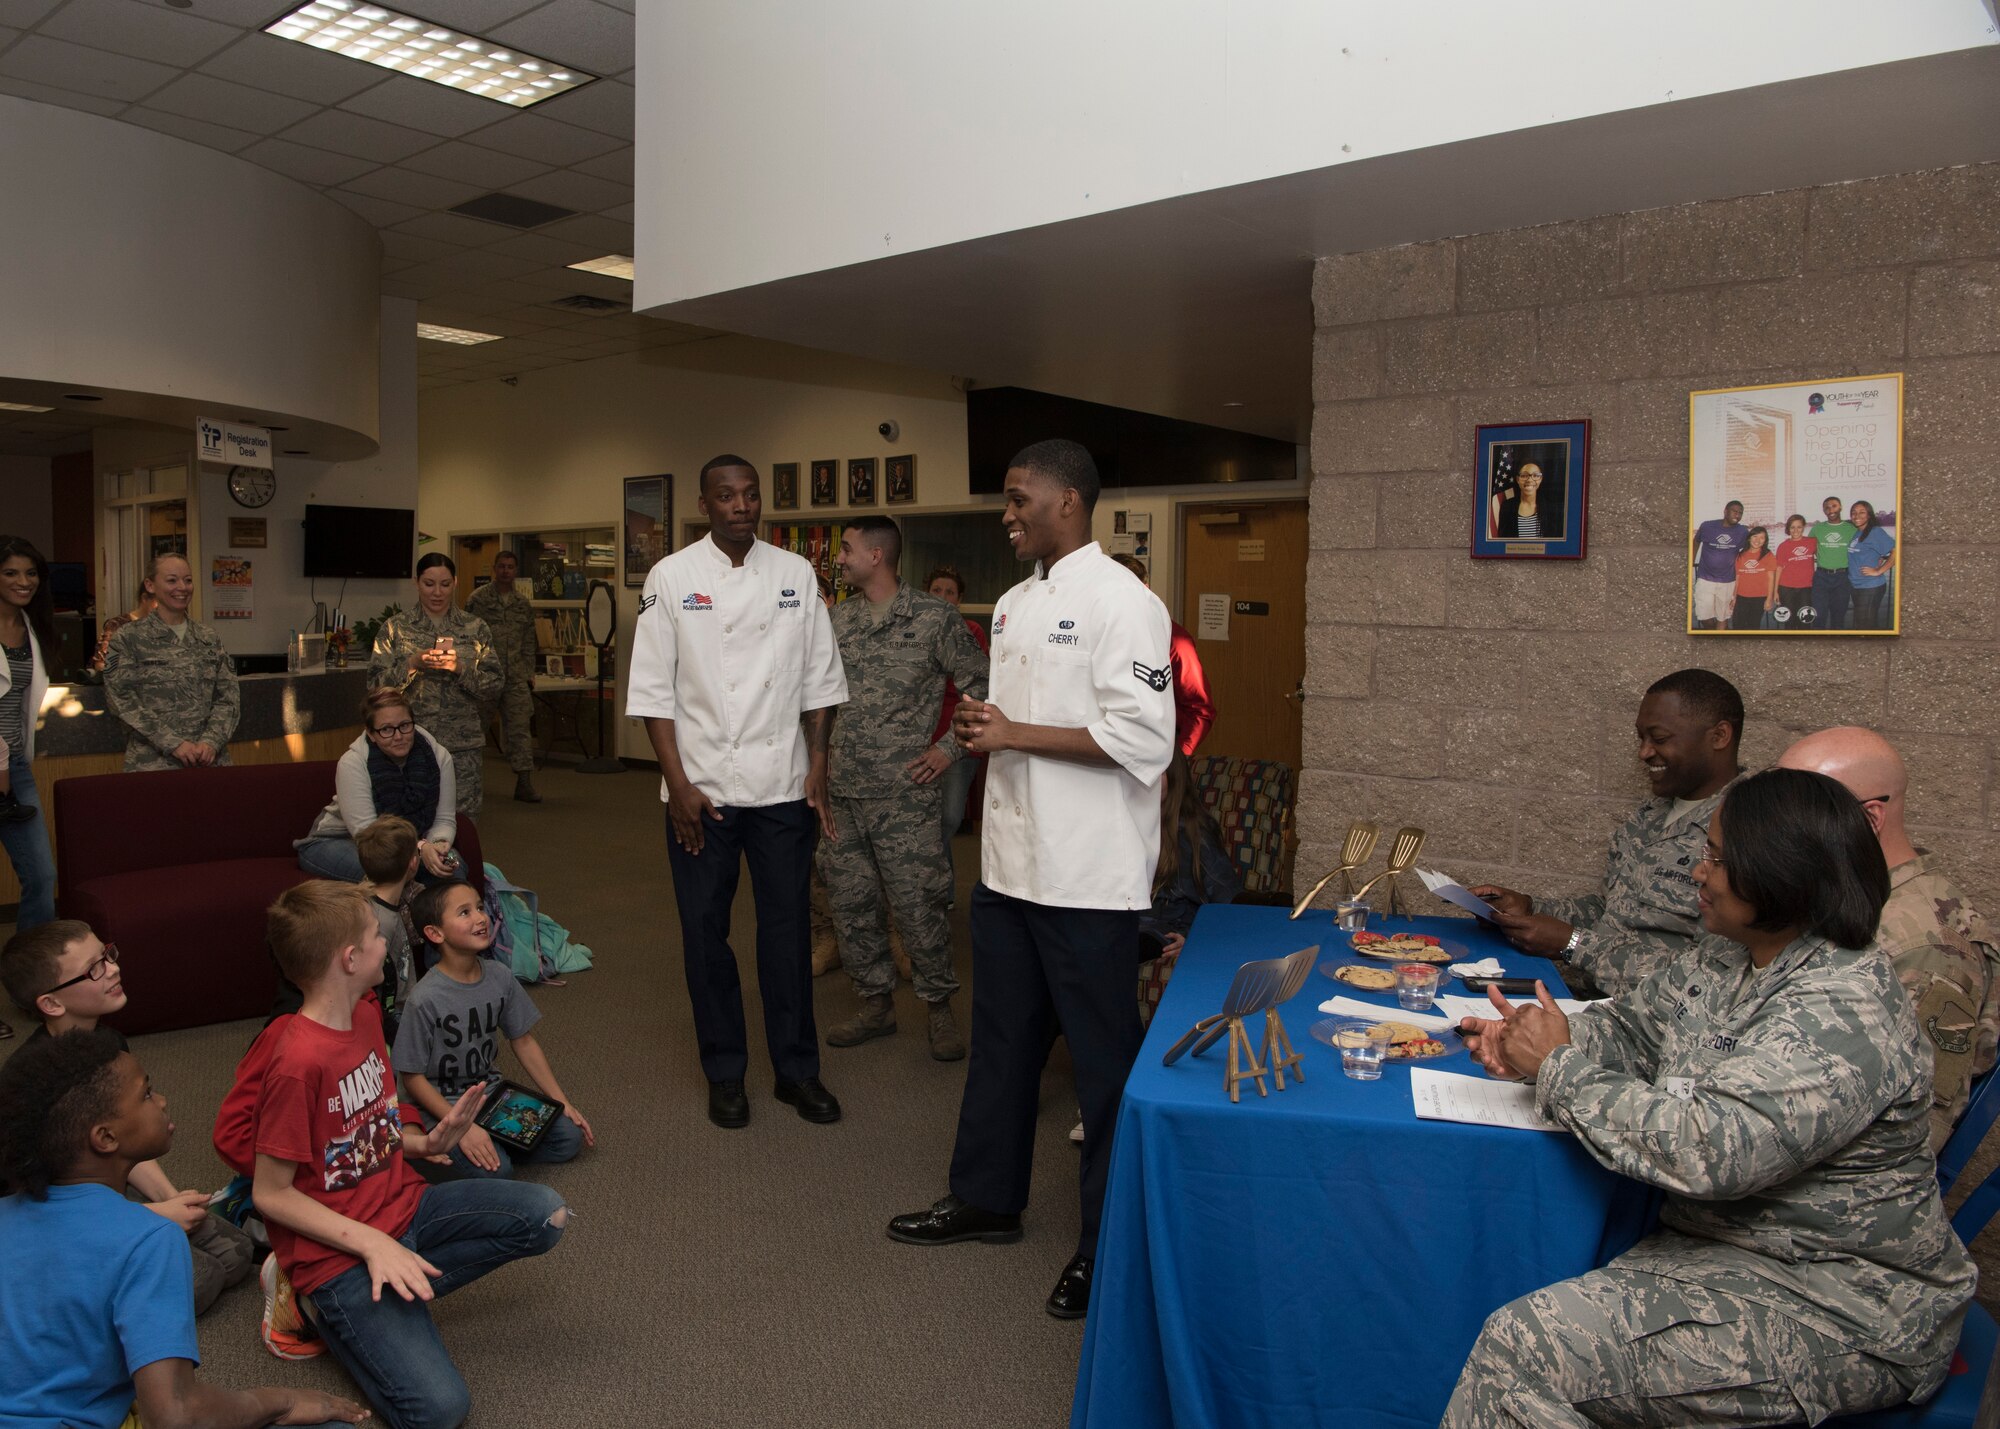 Youth gather as Airman 1st Class Malik Cherry, 49th Force Support Squadron food service specialist (middle), announces who won the baking competition, Jan. 30, 2019, on Holloman Air Force Base, N.M. Out of the five teams from the Youth and Teen Center competing in cookie baking, Papyrus’s Cookie Corner, was announced as the winner and received golden spatulas. (U.S. Air Force photo by Airman Autumn Vogt)